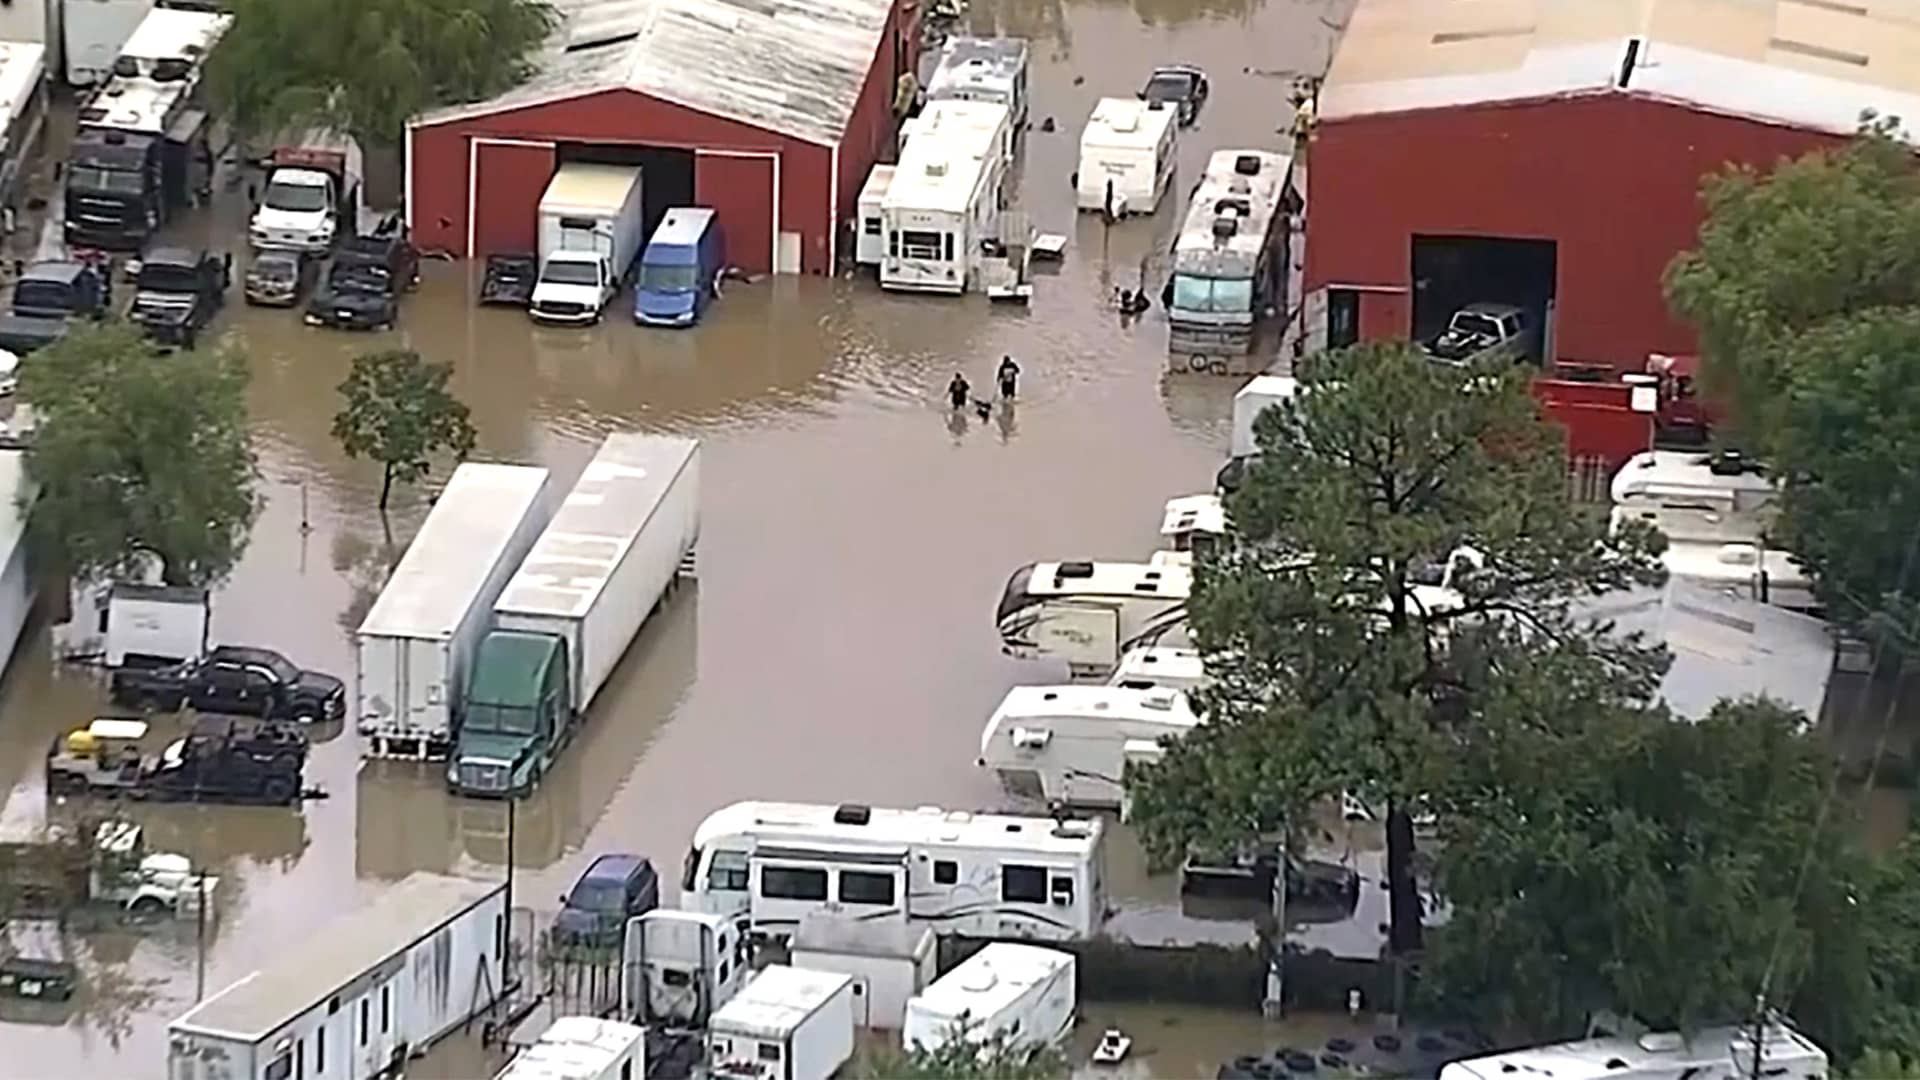 Residents navigate floodwaters after heavy flooding in the Dallas metro area submerged roads and entire neighborhoods, in Seagoville, Texas, U.S., August 22, 2022, in this still image taken from video.